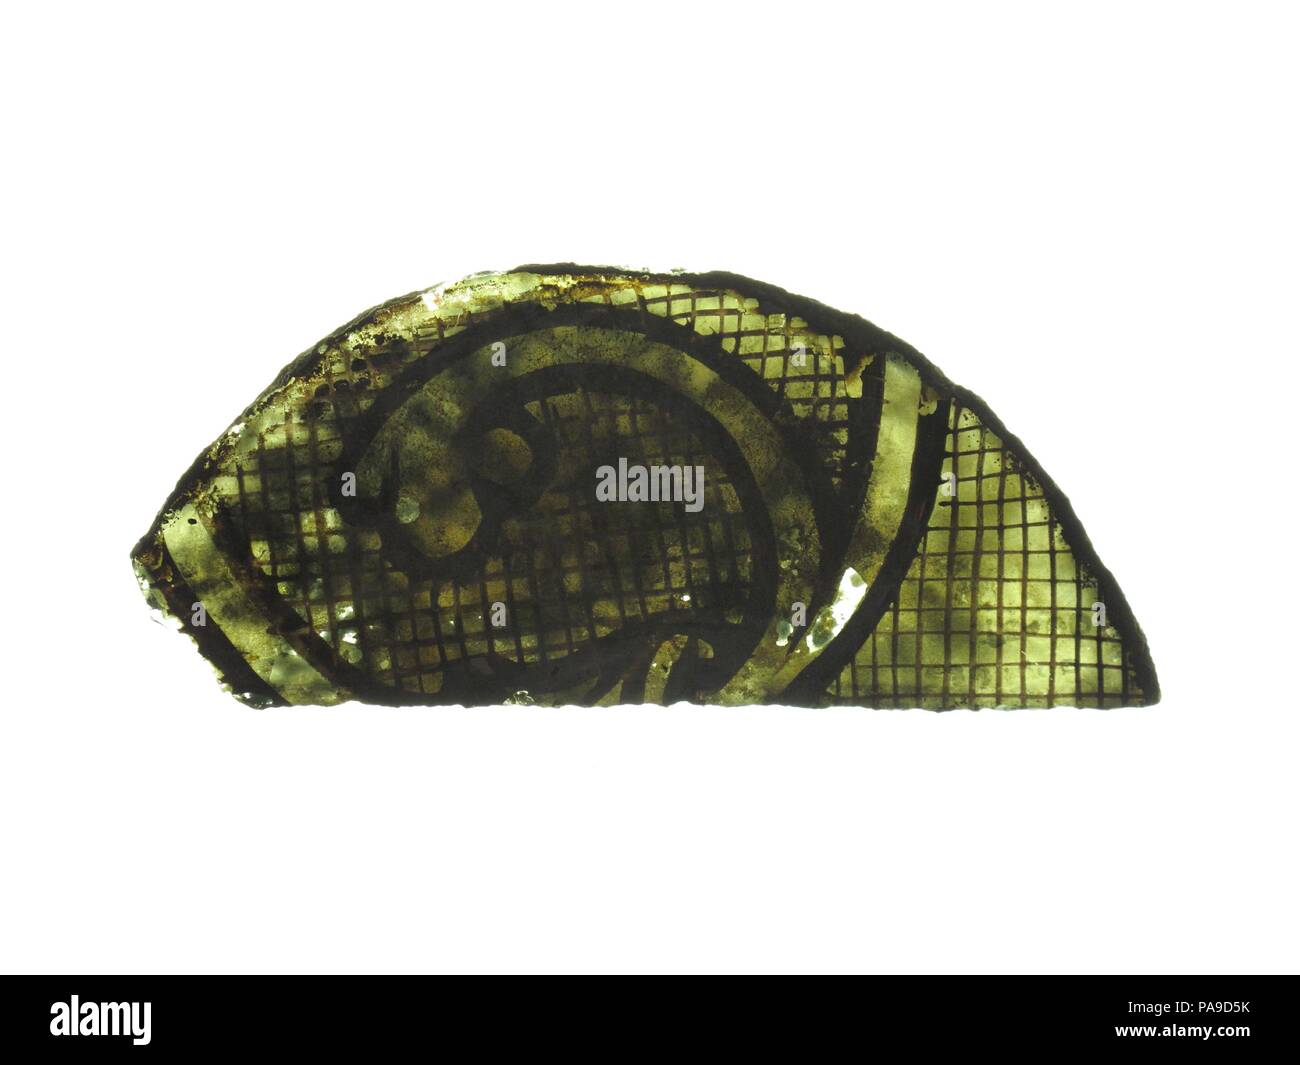 Glass Fragment. Culture: French. Dimensions: Overall: 2 5/8 x 5 7/8 in. (6.7 x 14.9 cm). Date: 13th century. Museum: Metropolitan Museum of Art, New York, USA. Stock Photo